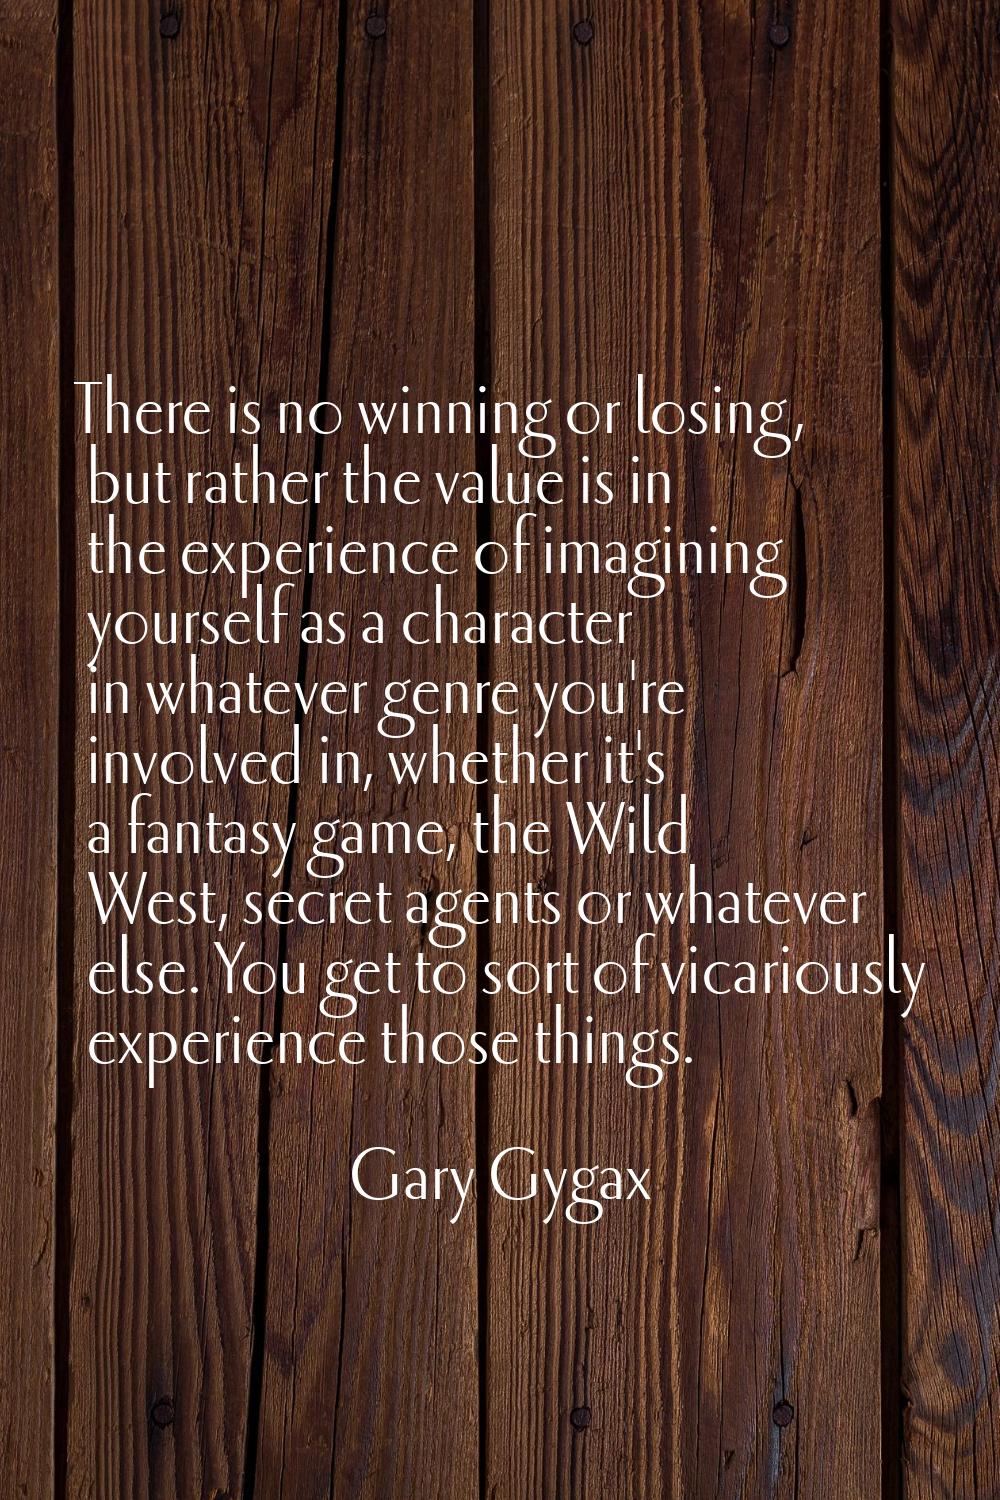 There is no winning or losing, but rather the value is in the experience of imagining yourself as a